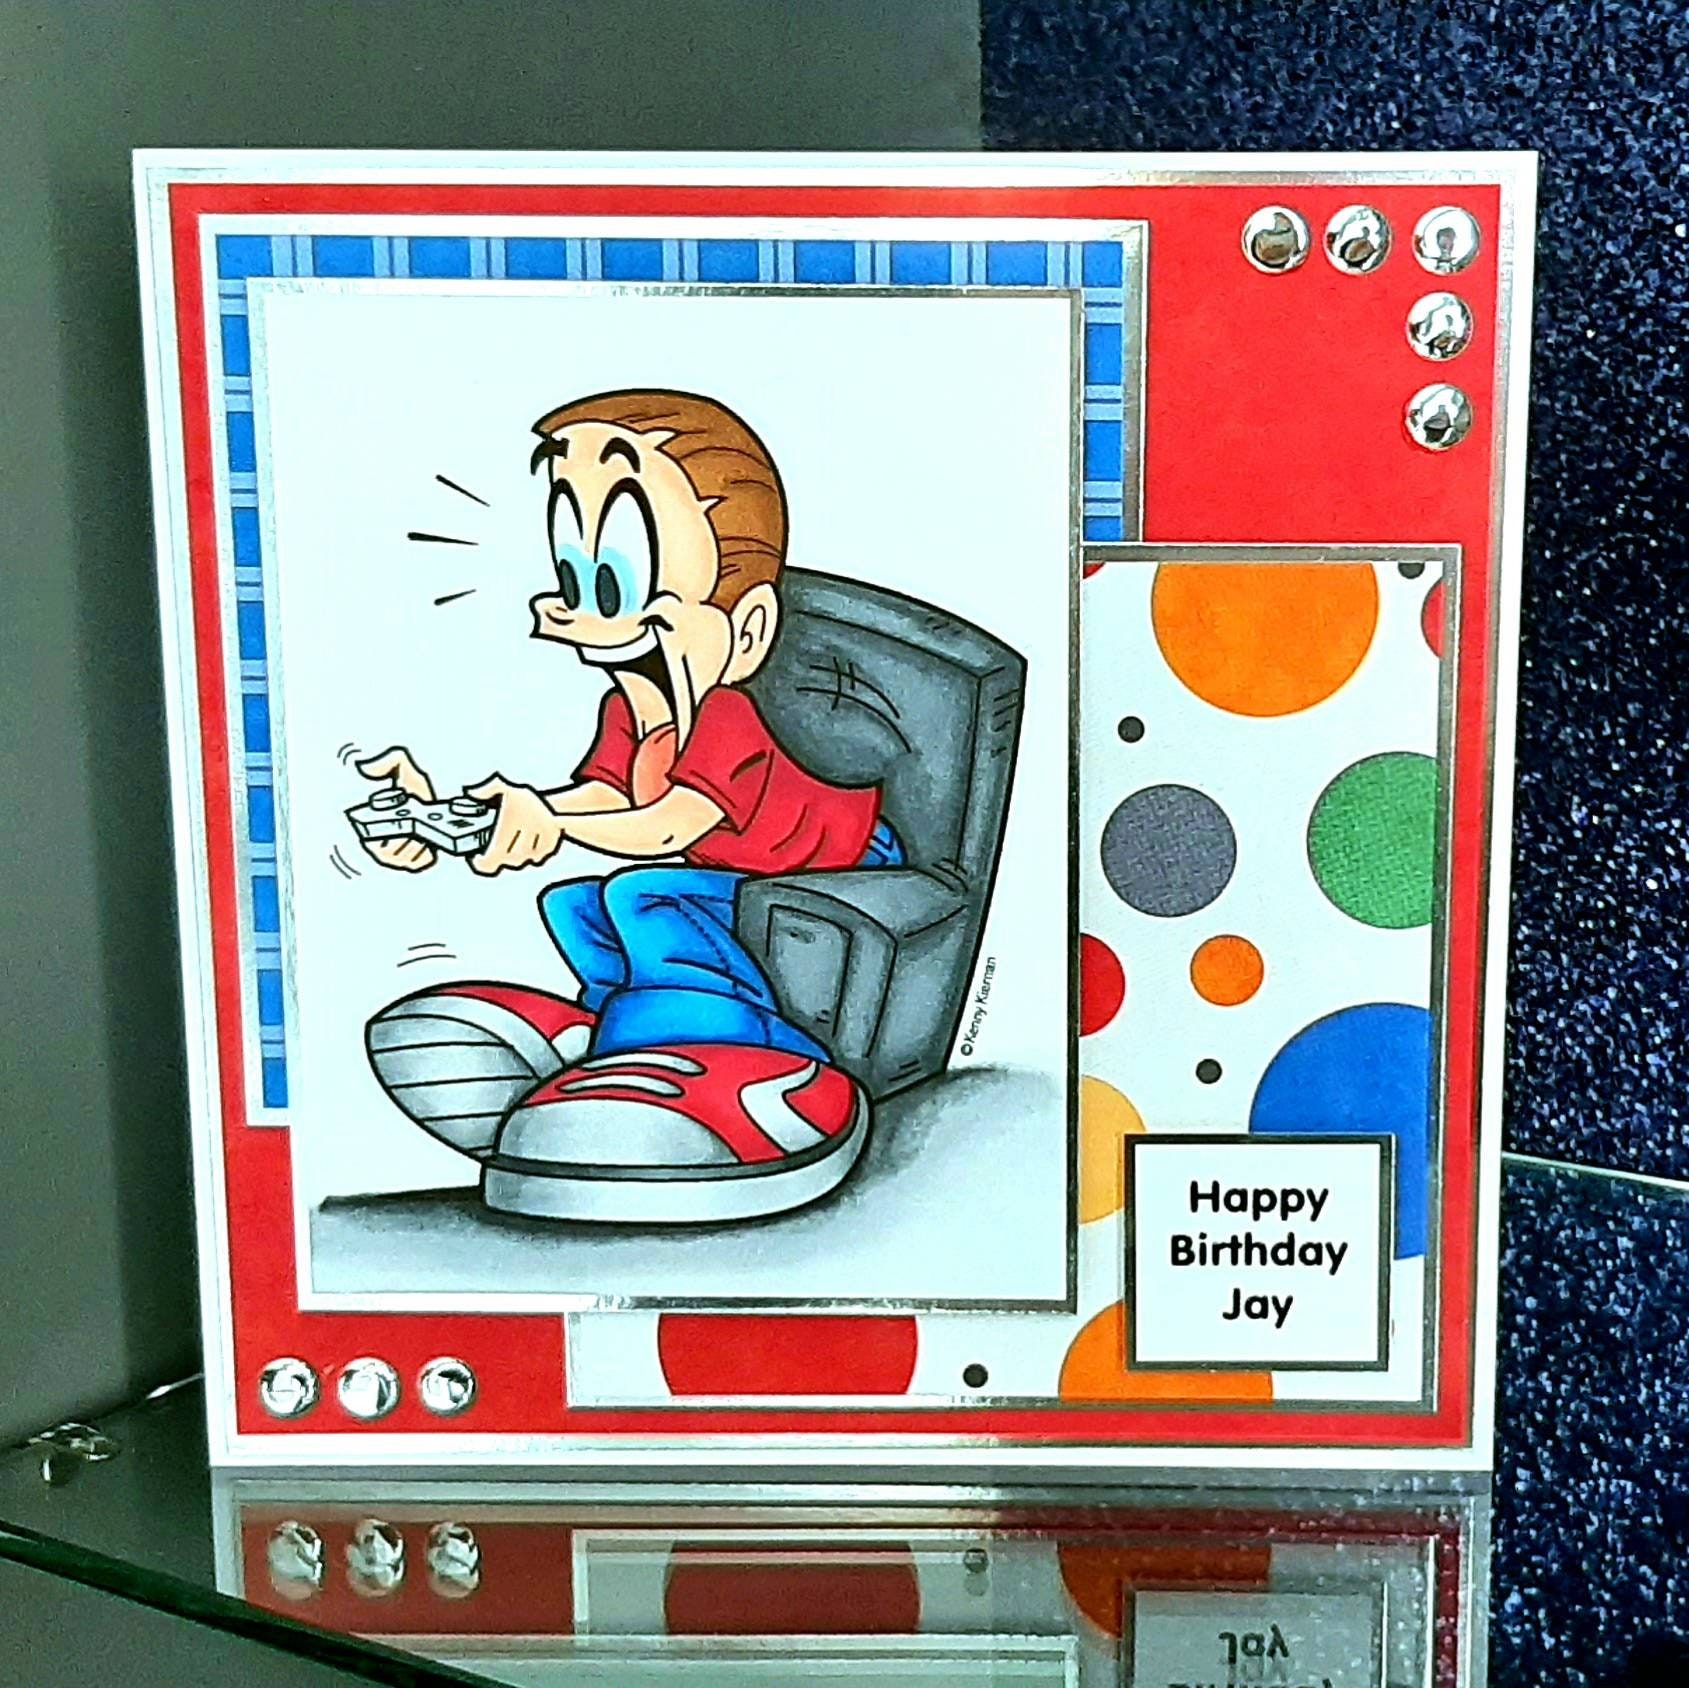 personalised-handcrafted-gaming-birthday-card-son-birthday-etsy-uk